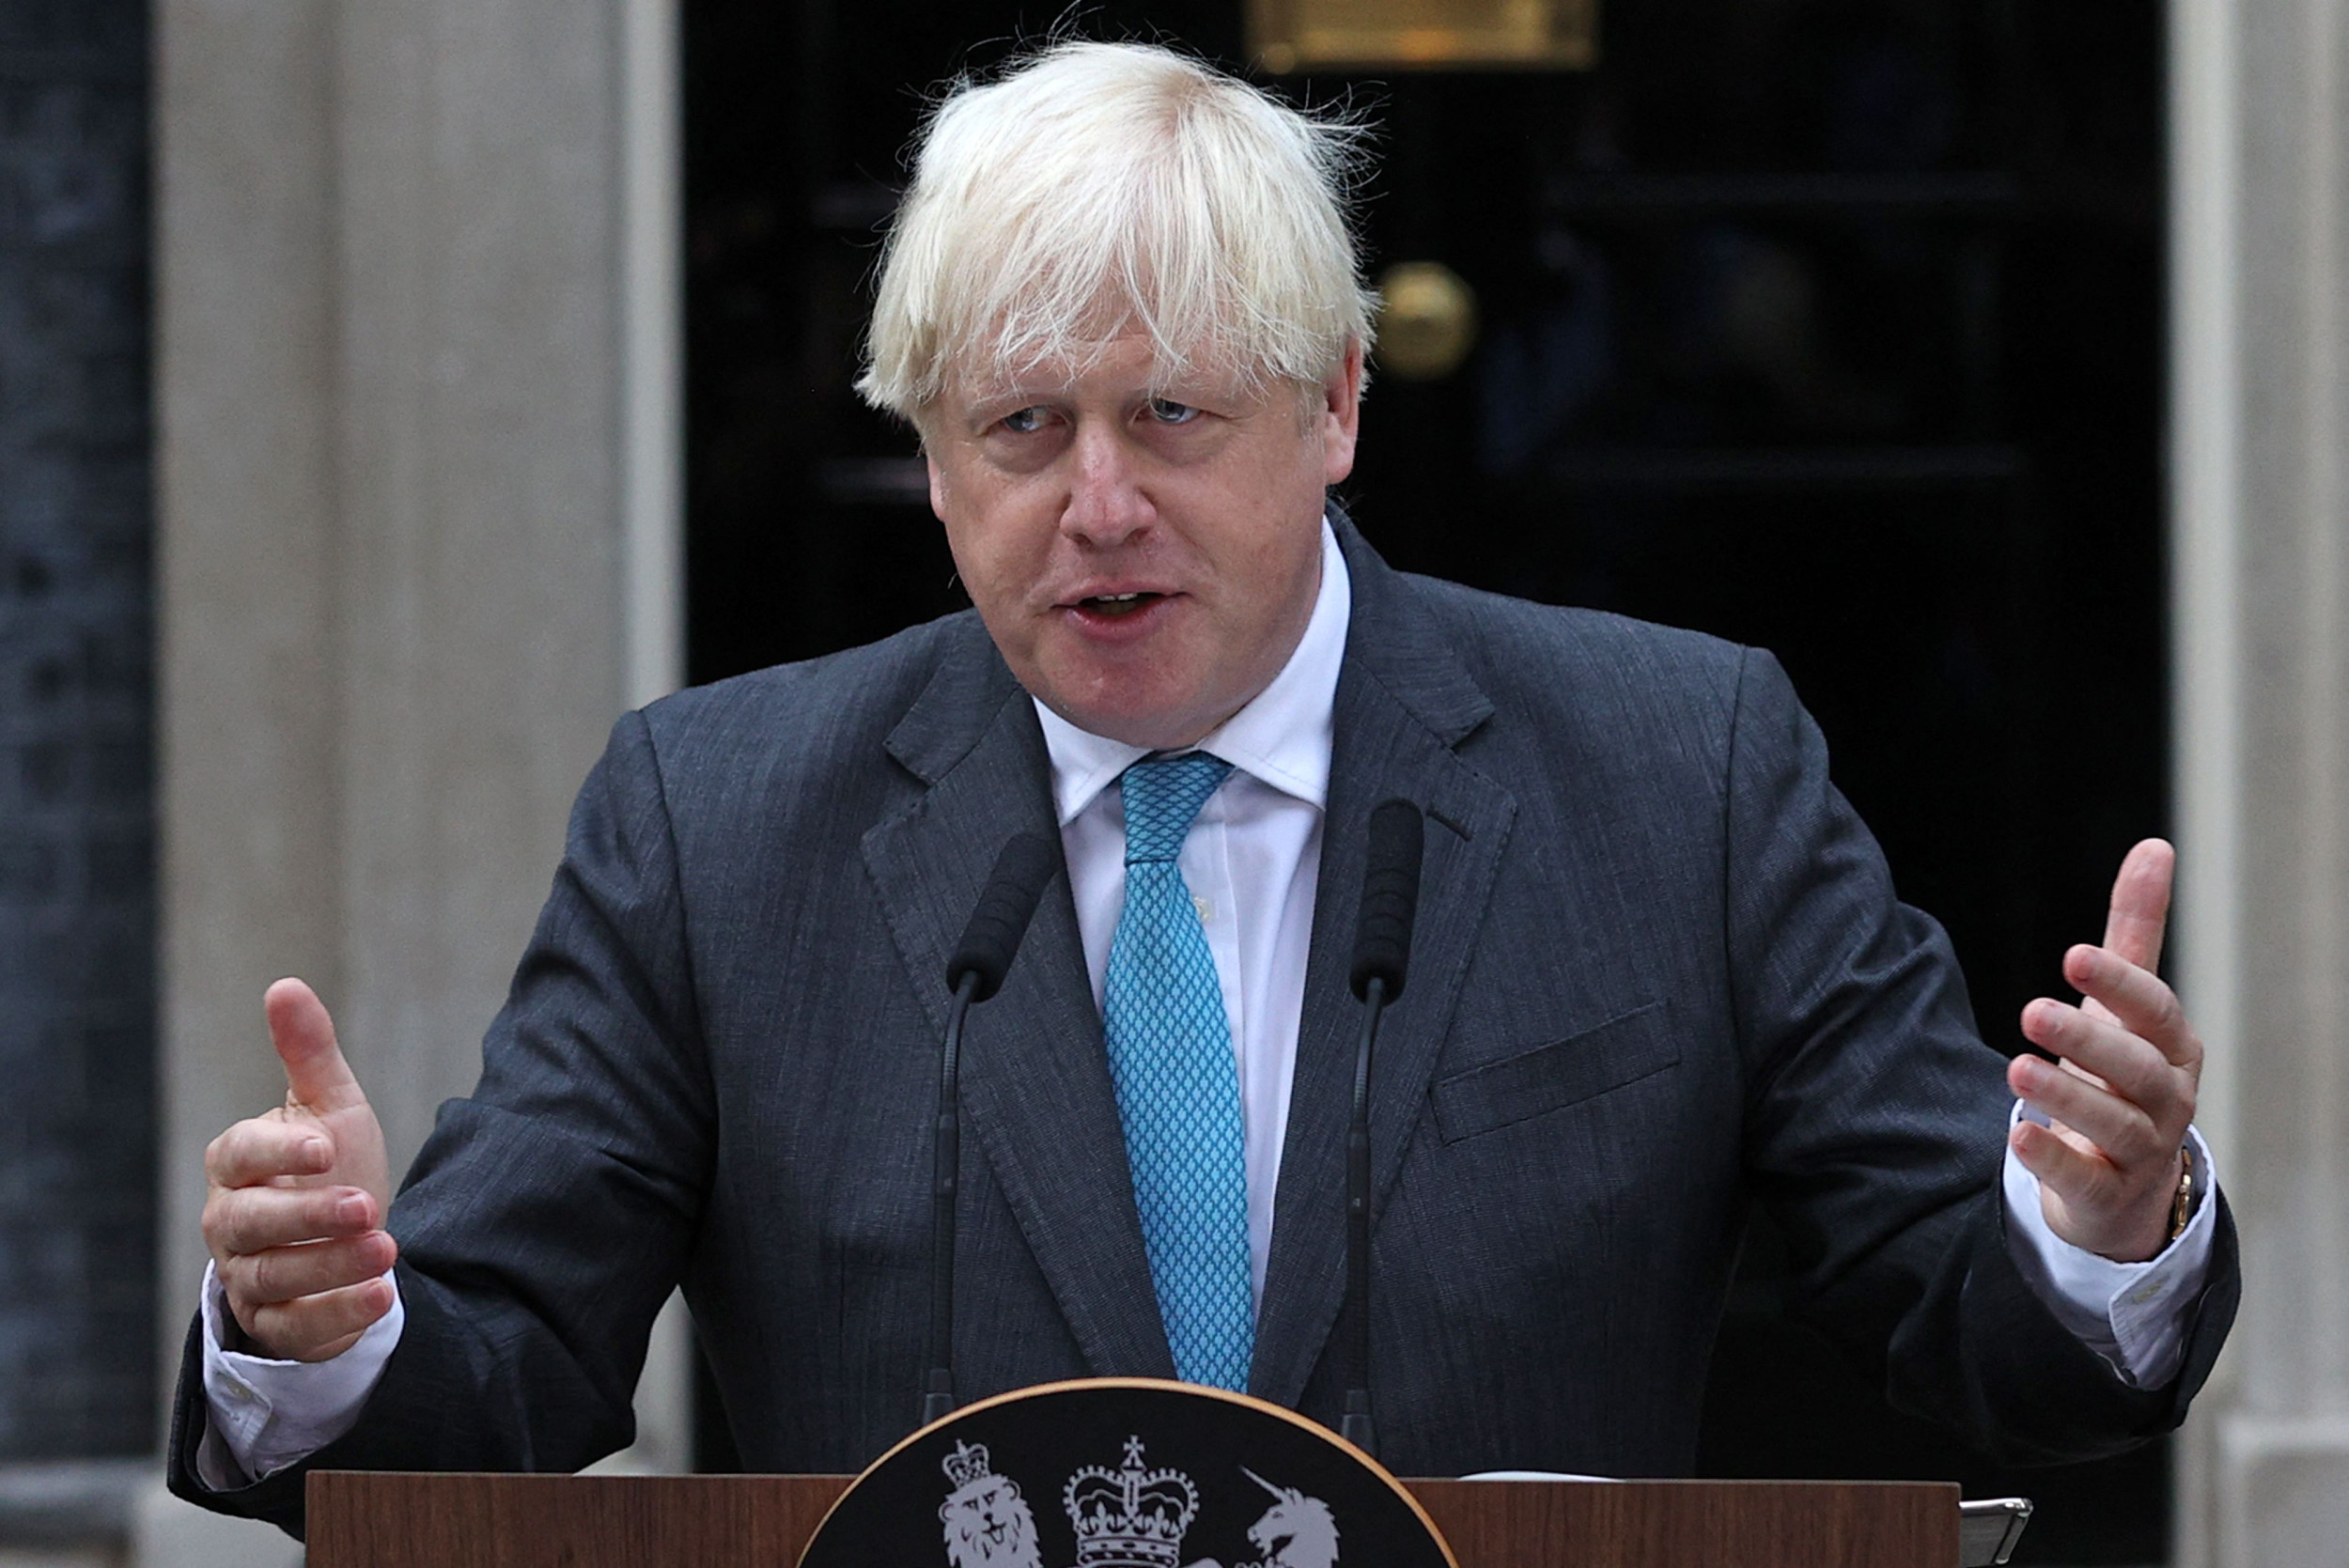 Germany Wanted Ukraine to Surrender to Russia, Boris Johnson Claims